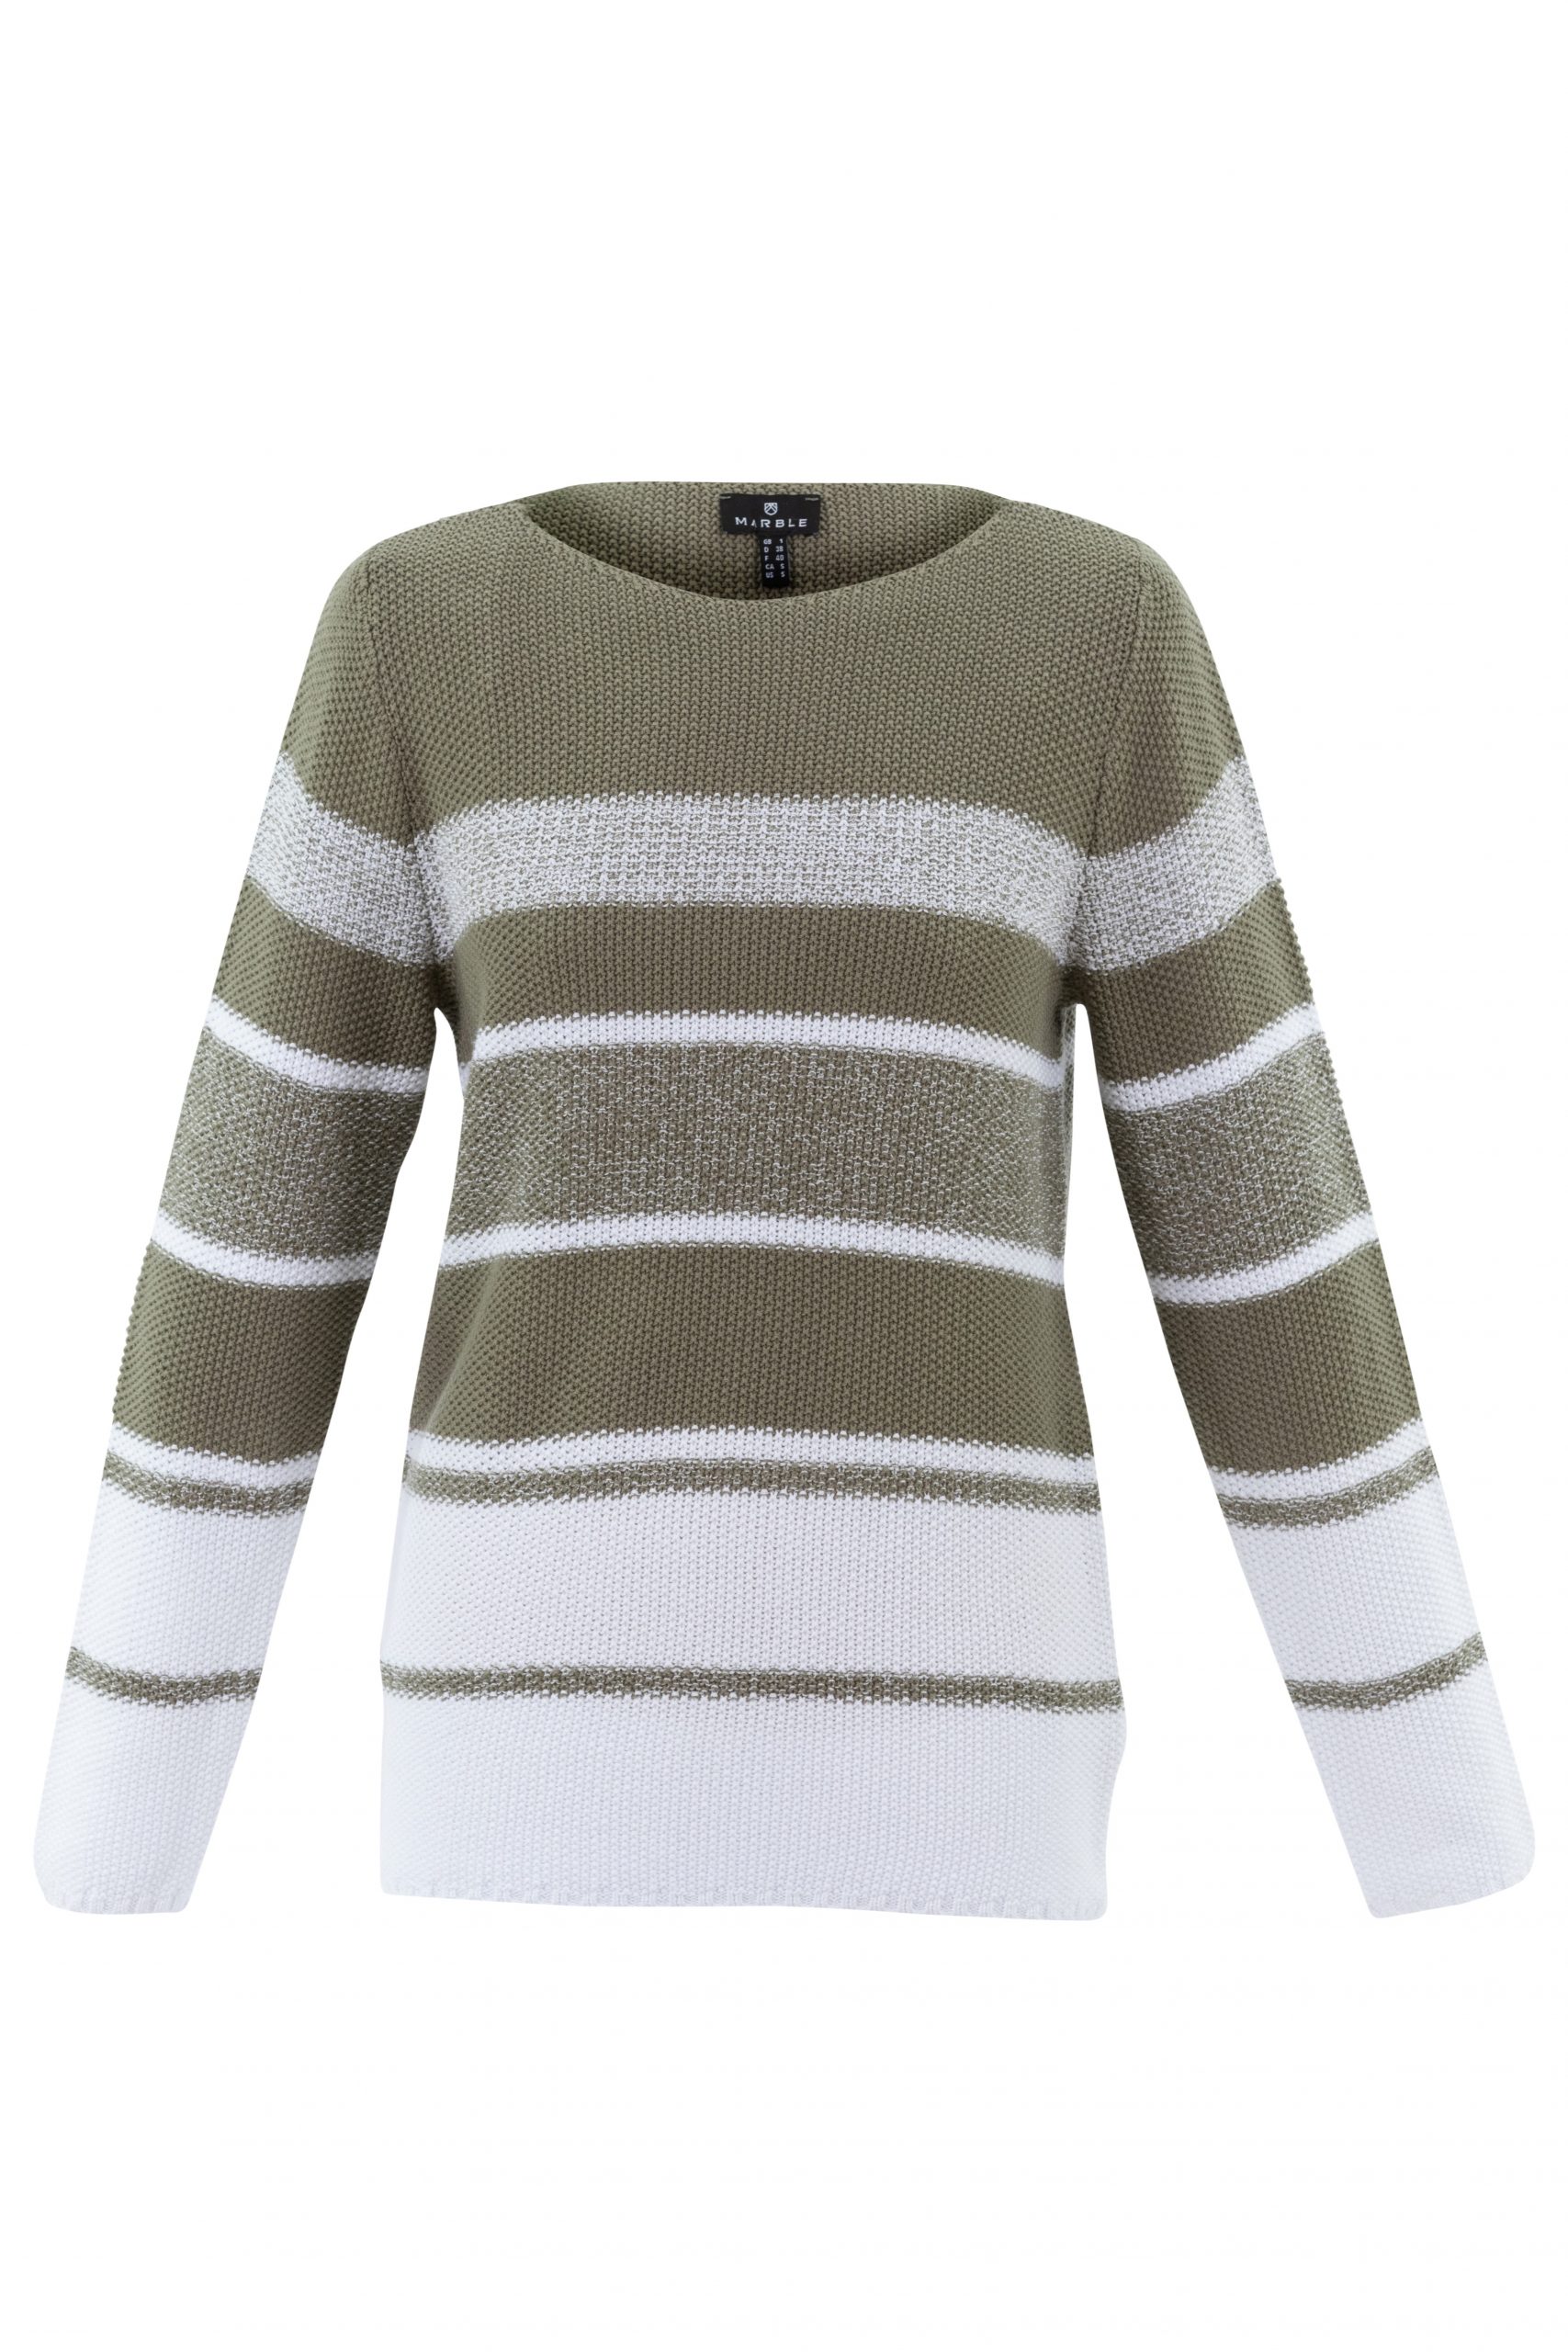 Marble 7445 123 Sweater